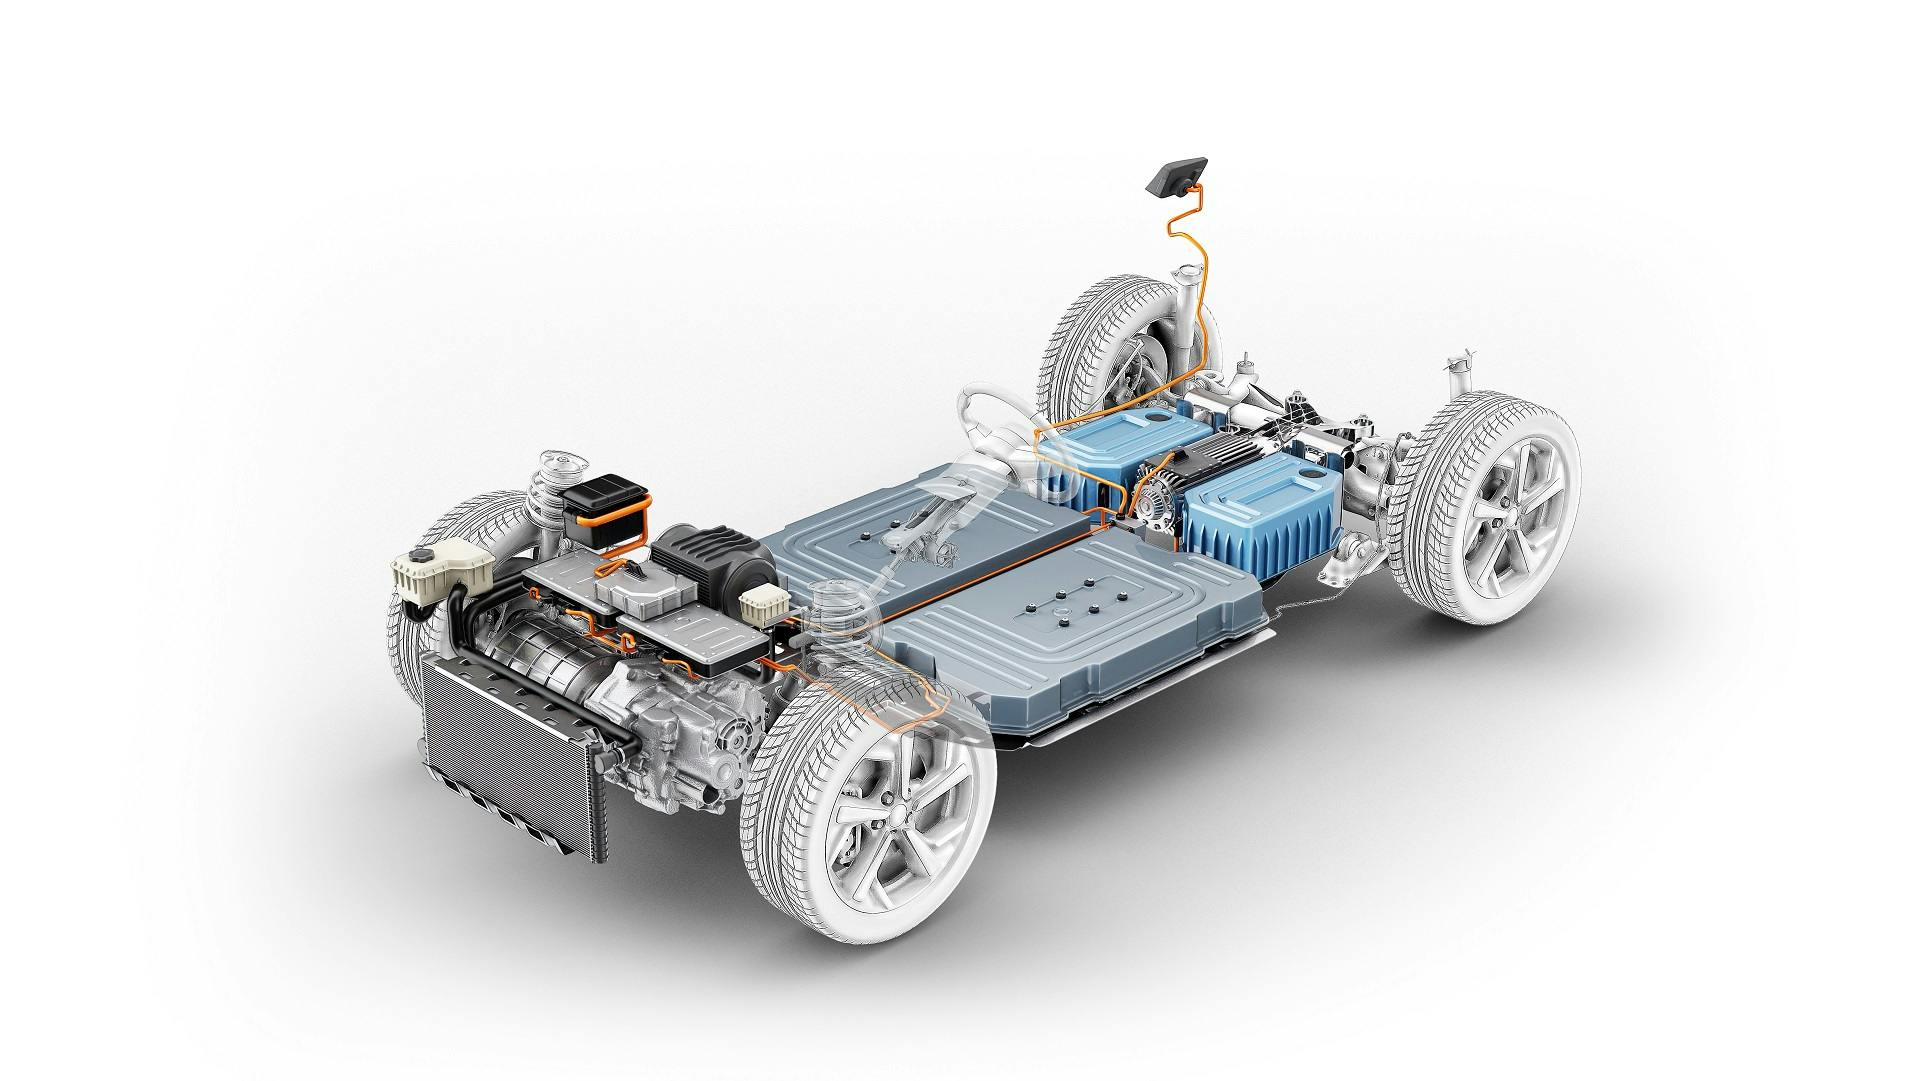 Fasttrack your EV chassis design Siemens Software